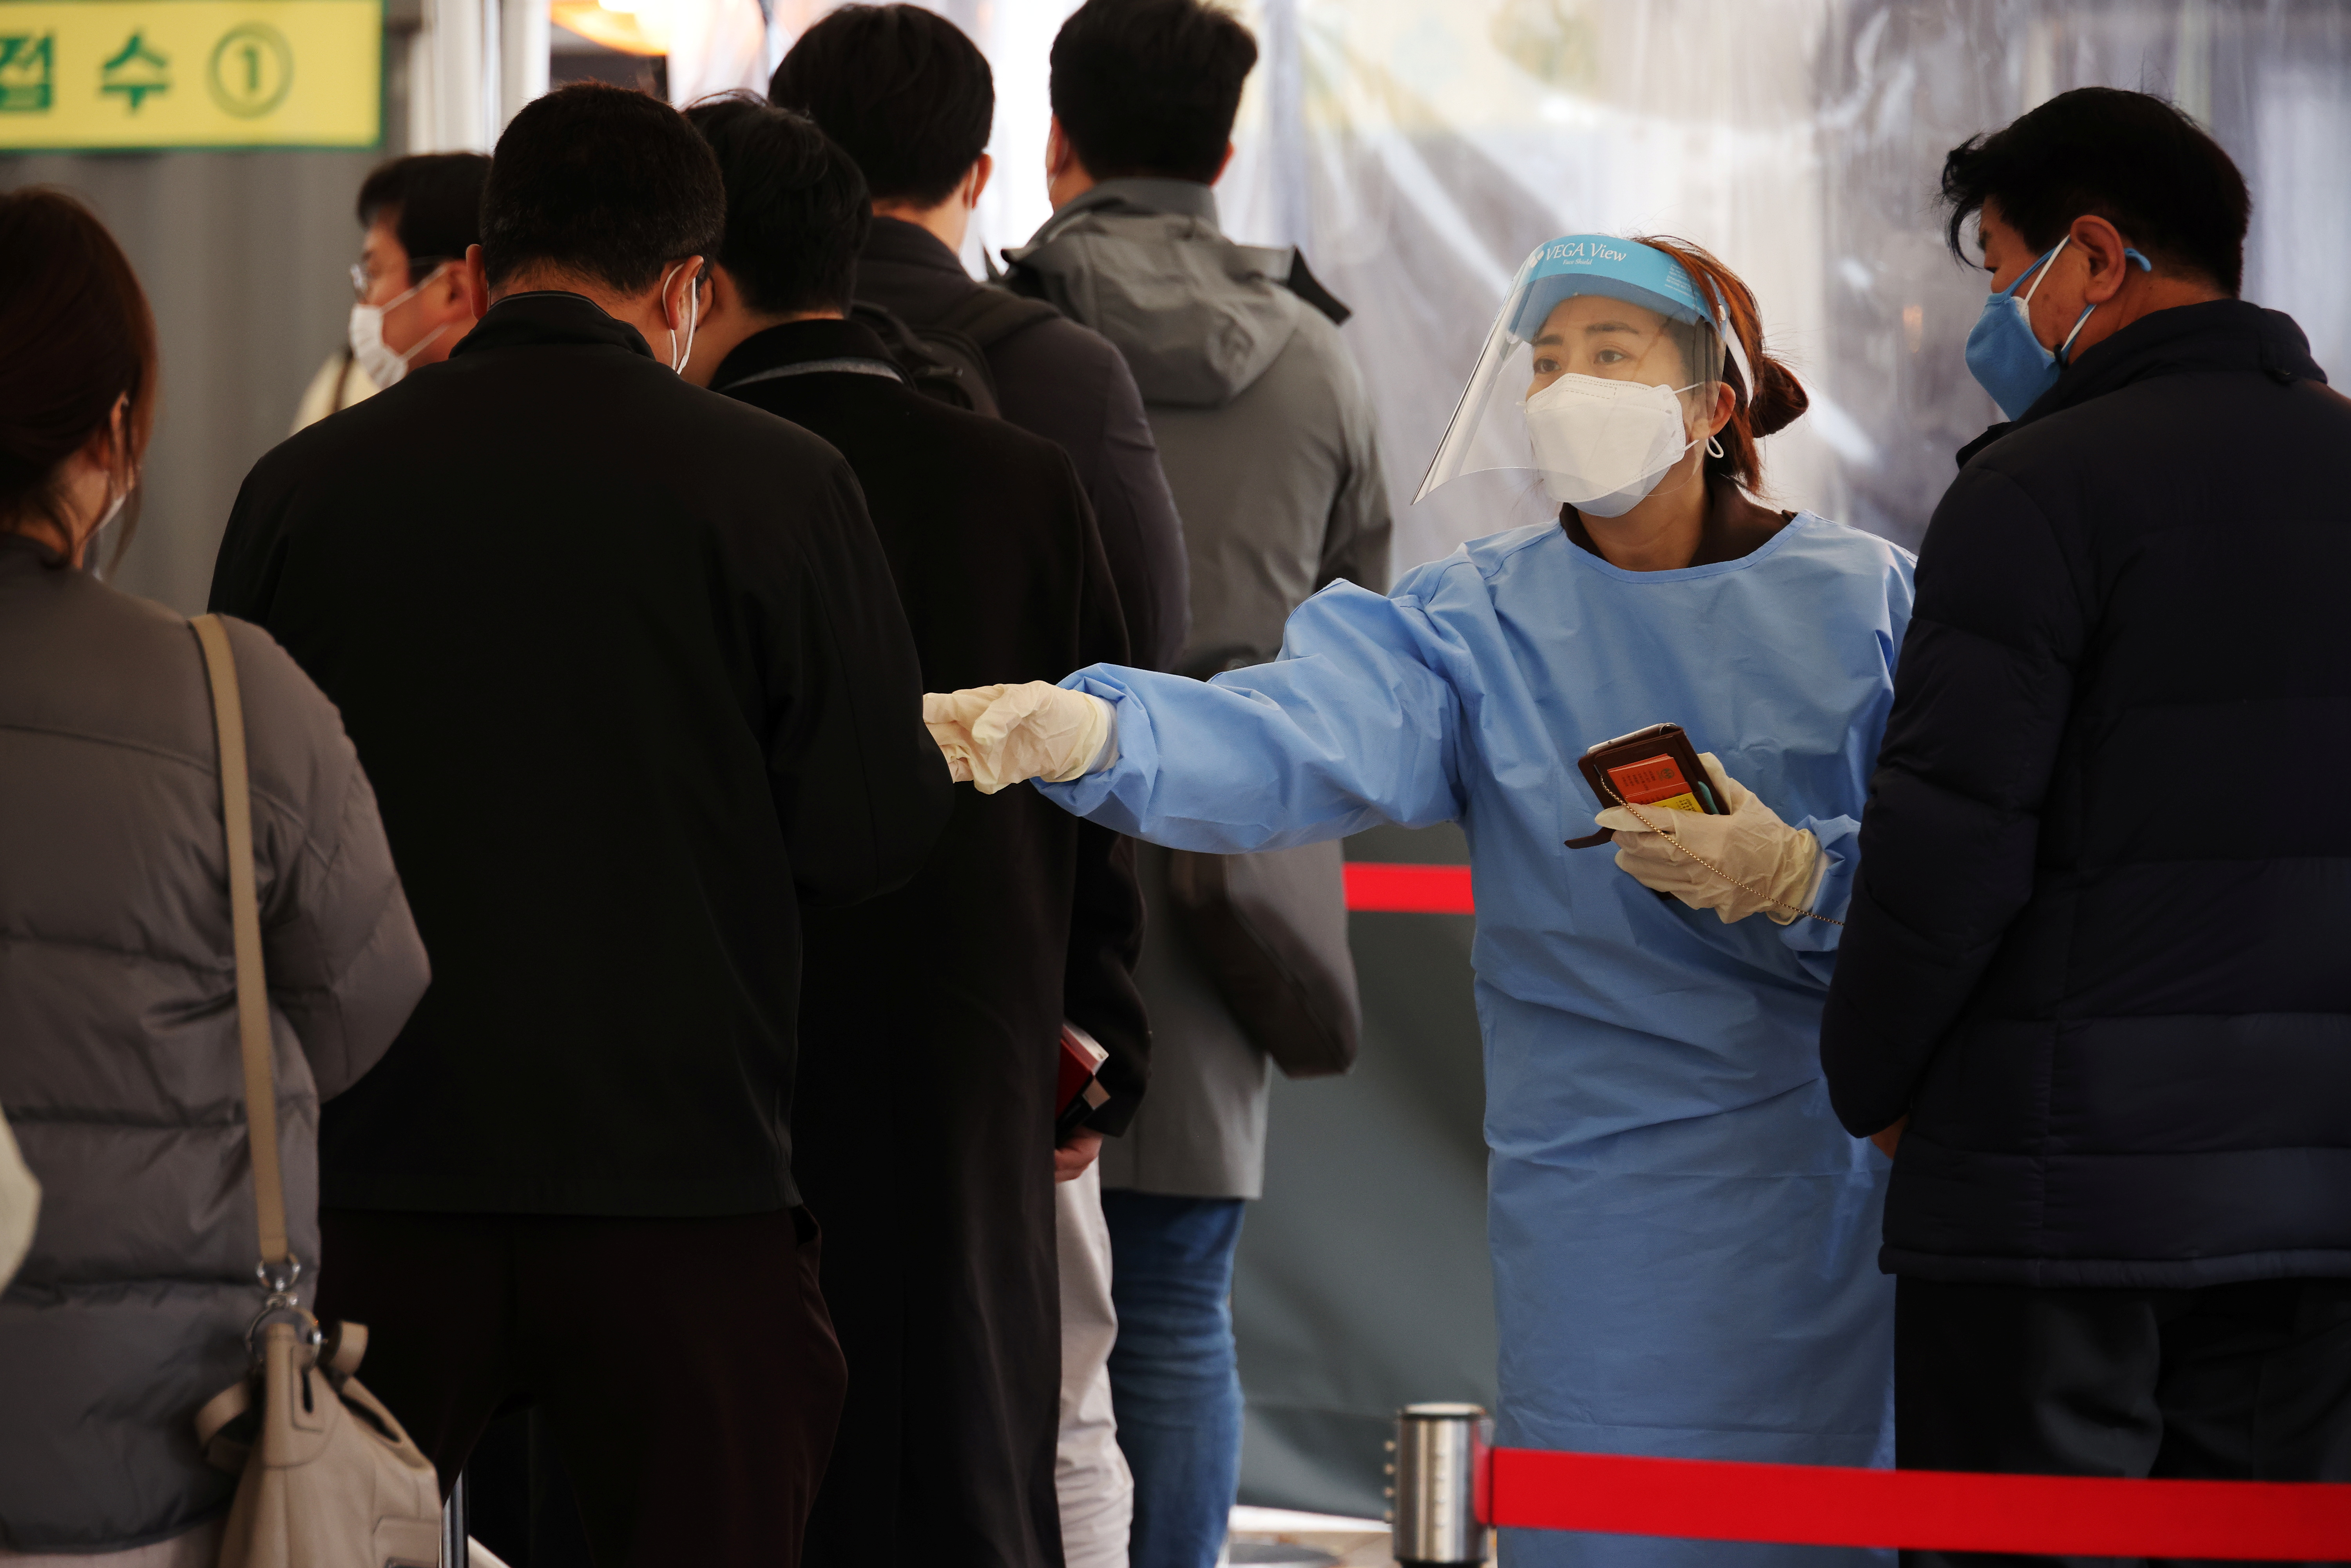 Health worker directs people arriving to undergo COVID-19 tests at testing site in Seoul